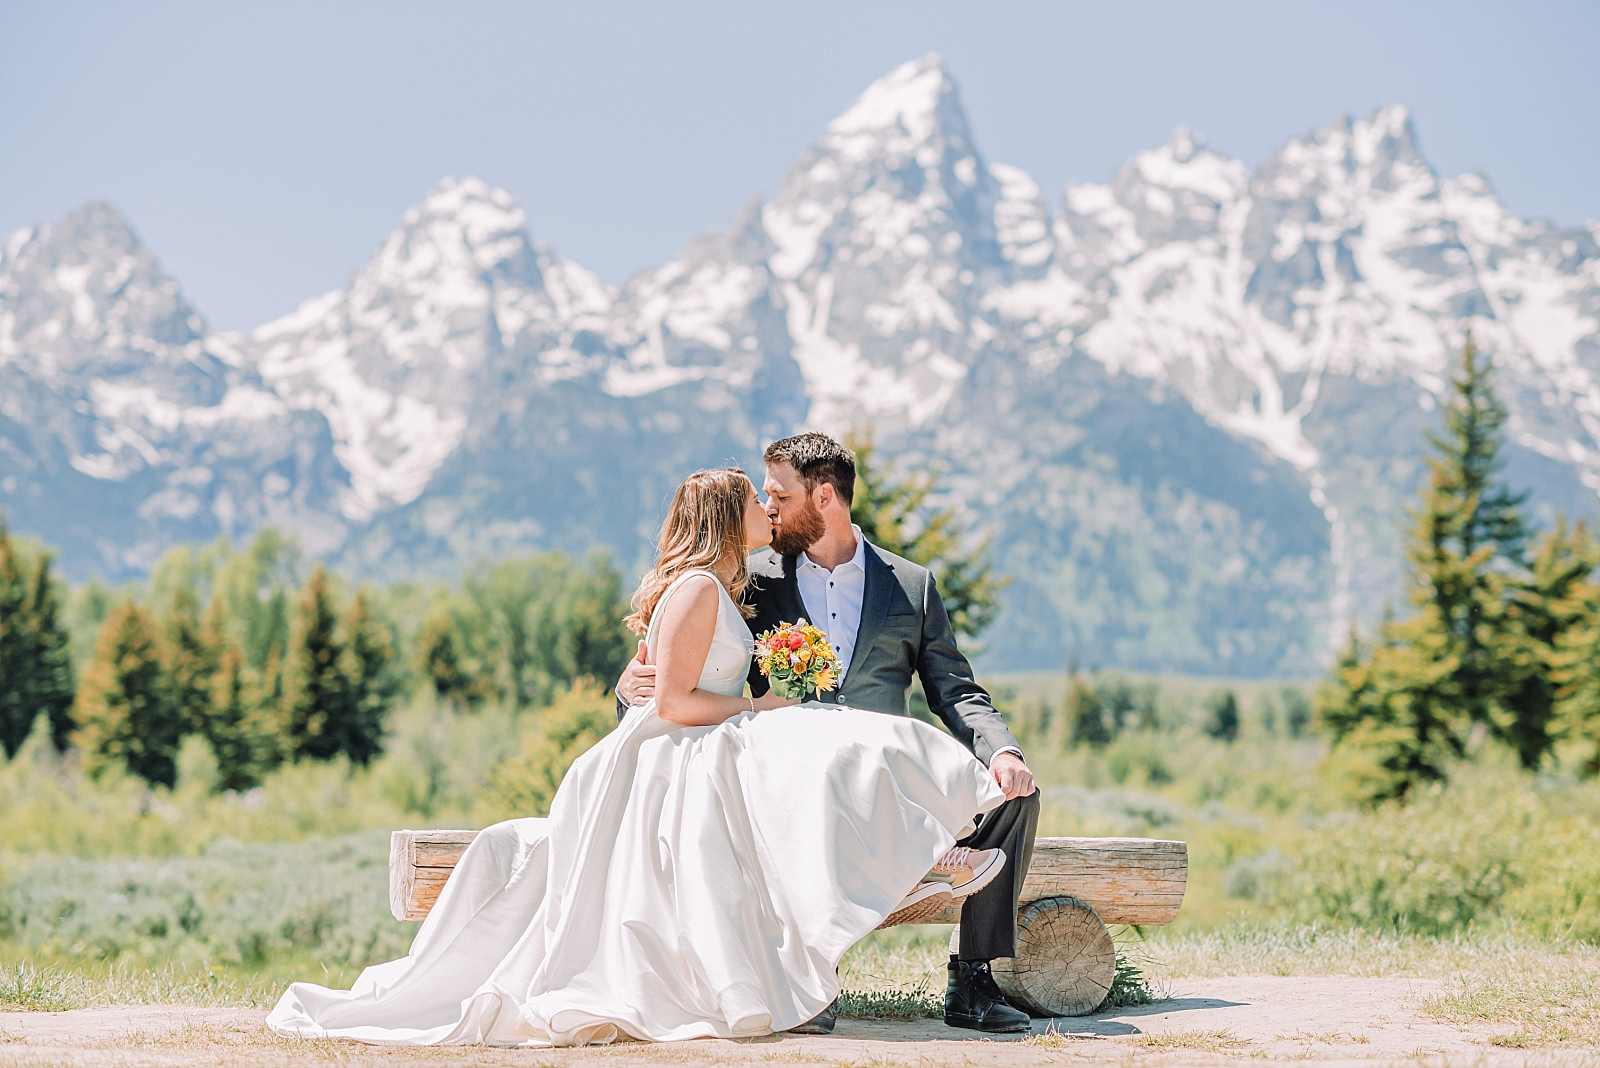 wedding portrait locations in jackson hole, grand teton national park elopement packages, summer outdoor weddings